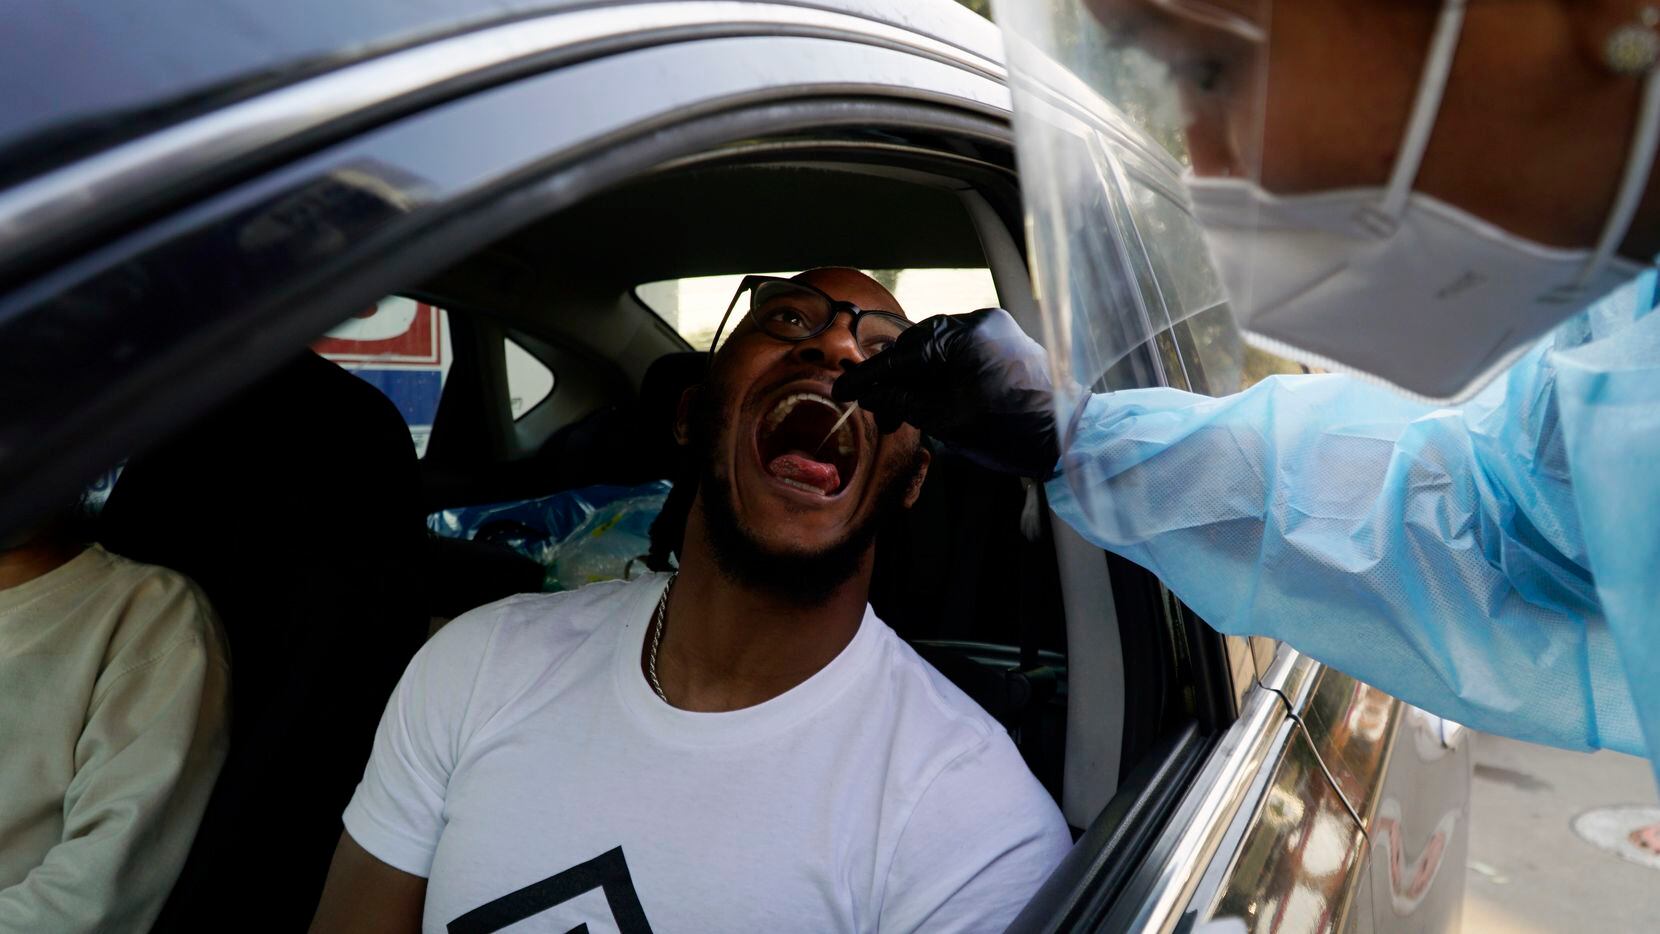 Antoine Howard gets a Covid test "Go Get Tested" location at a Shell station in Arlington.